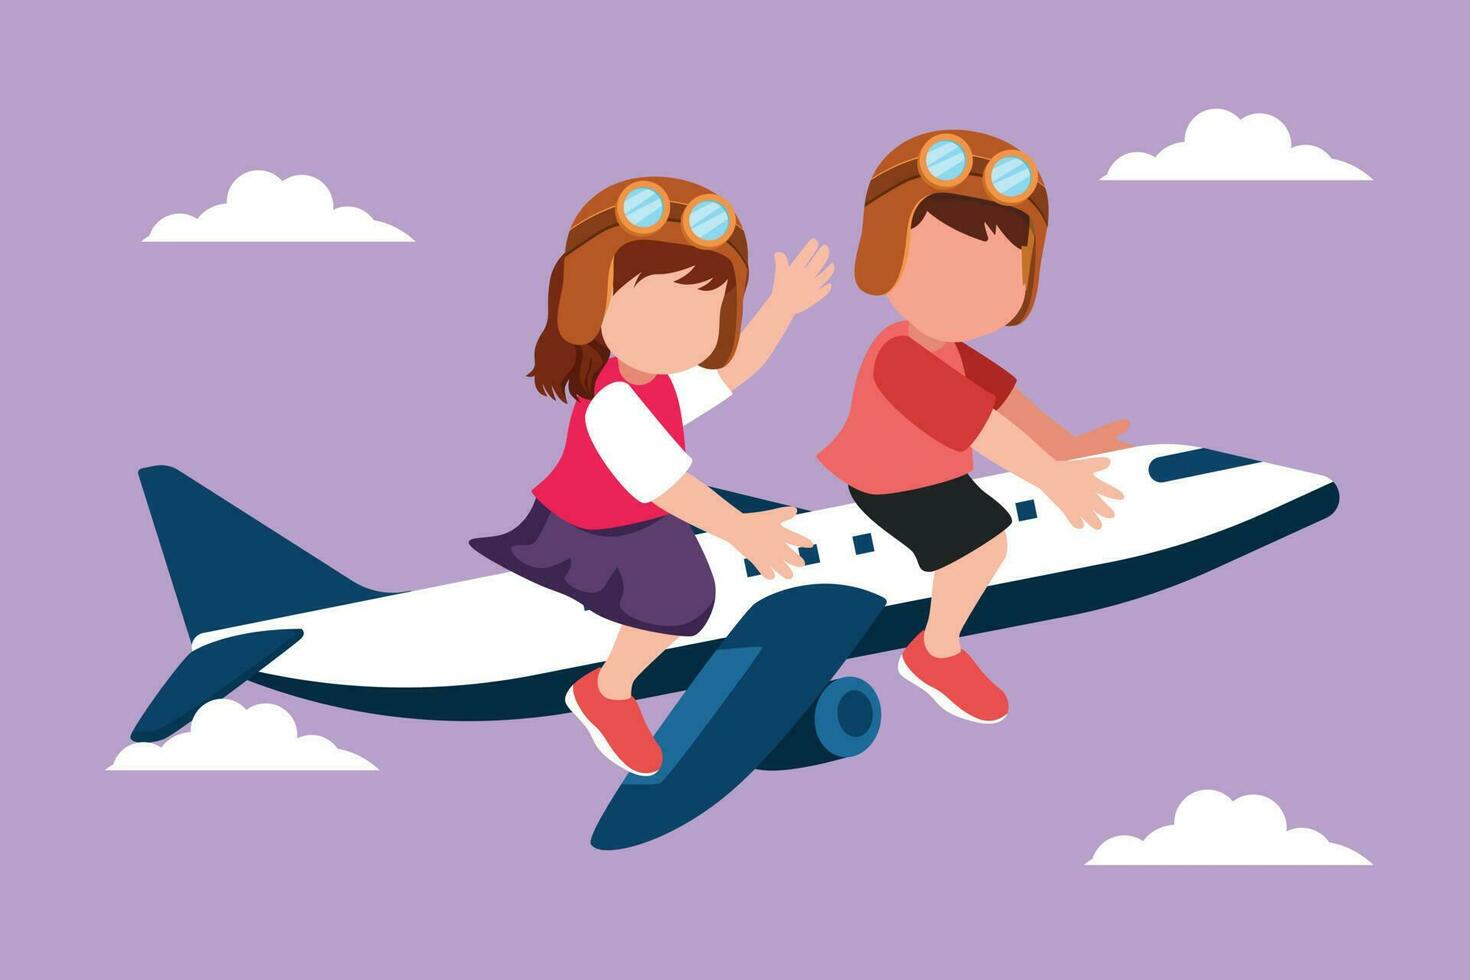 Cartoon flat style drawing little boy and girl riding small toy plane. Happy kids on airplane. Children riding electric toy airplane, summer journey, travel concept. Graphic design vector illustration